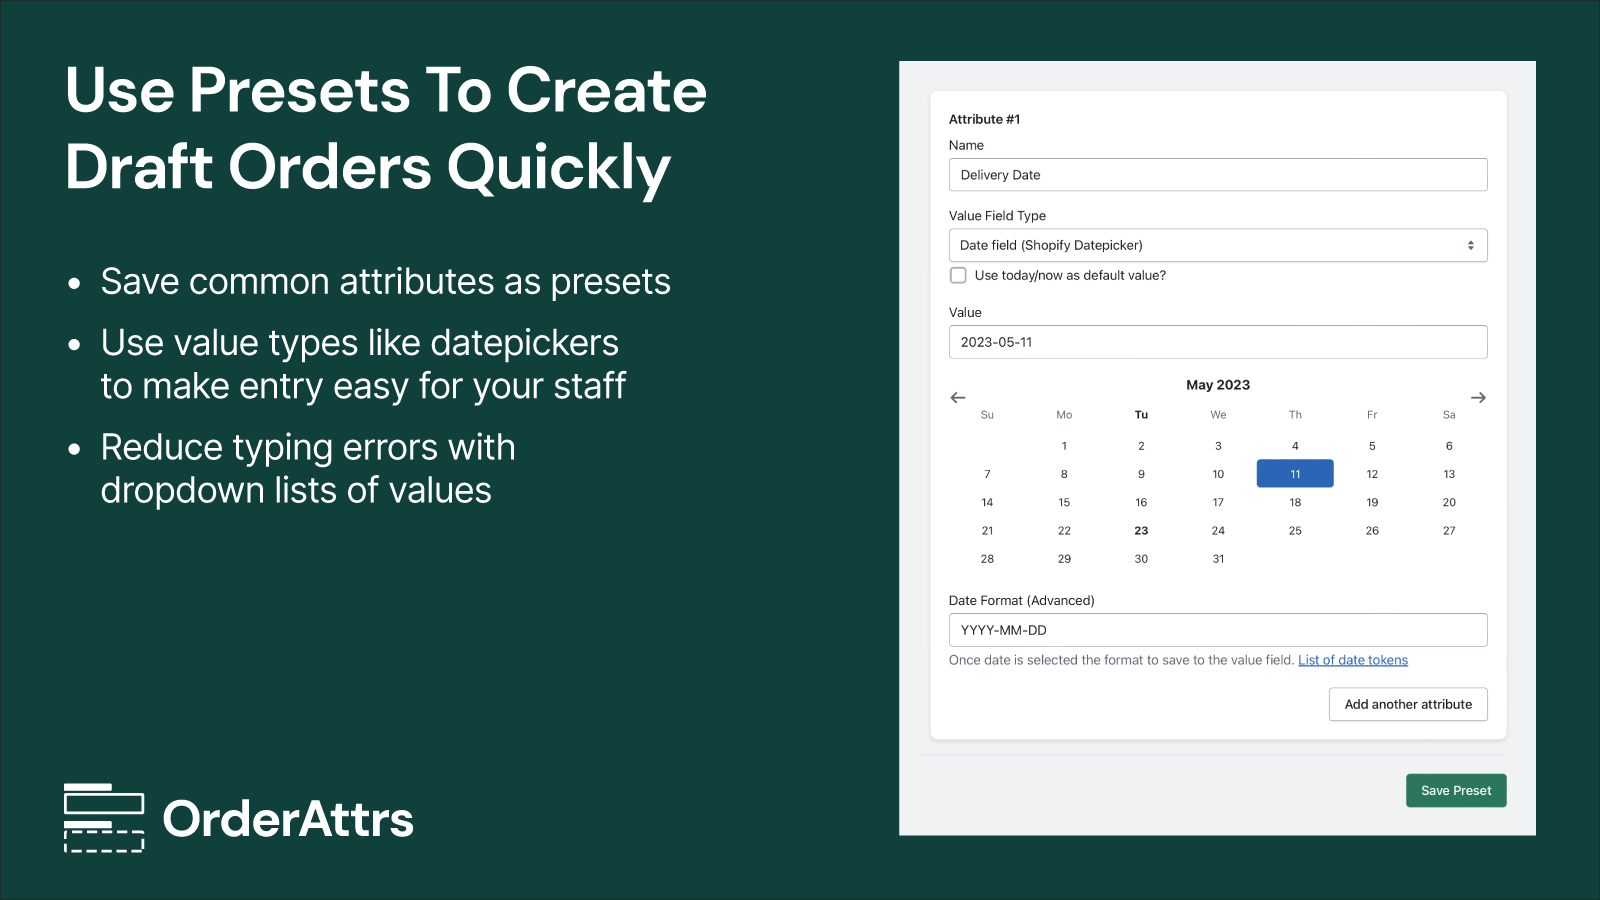 Use Presets To Create Draft Orders Quickly